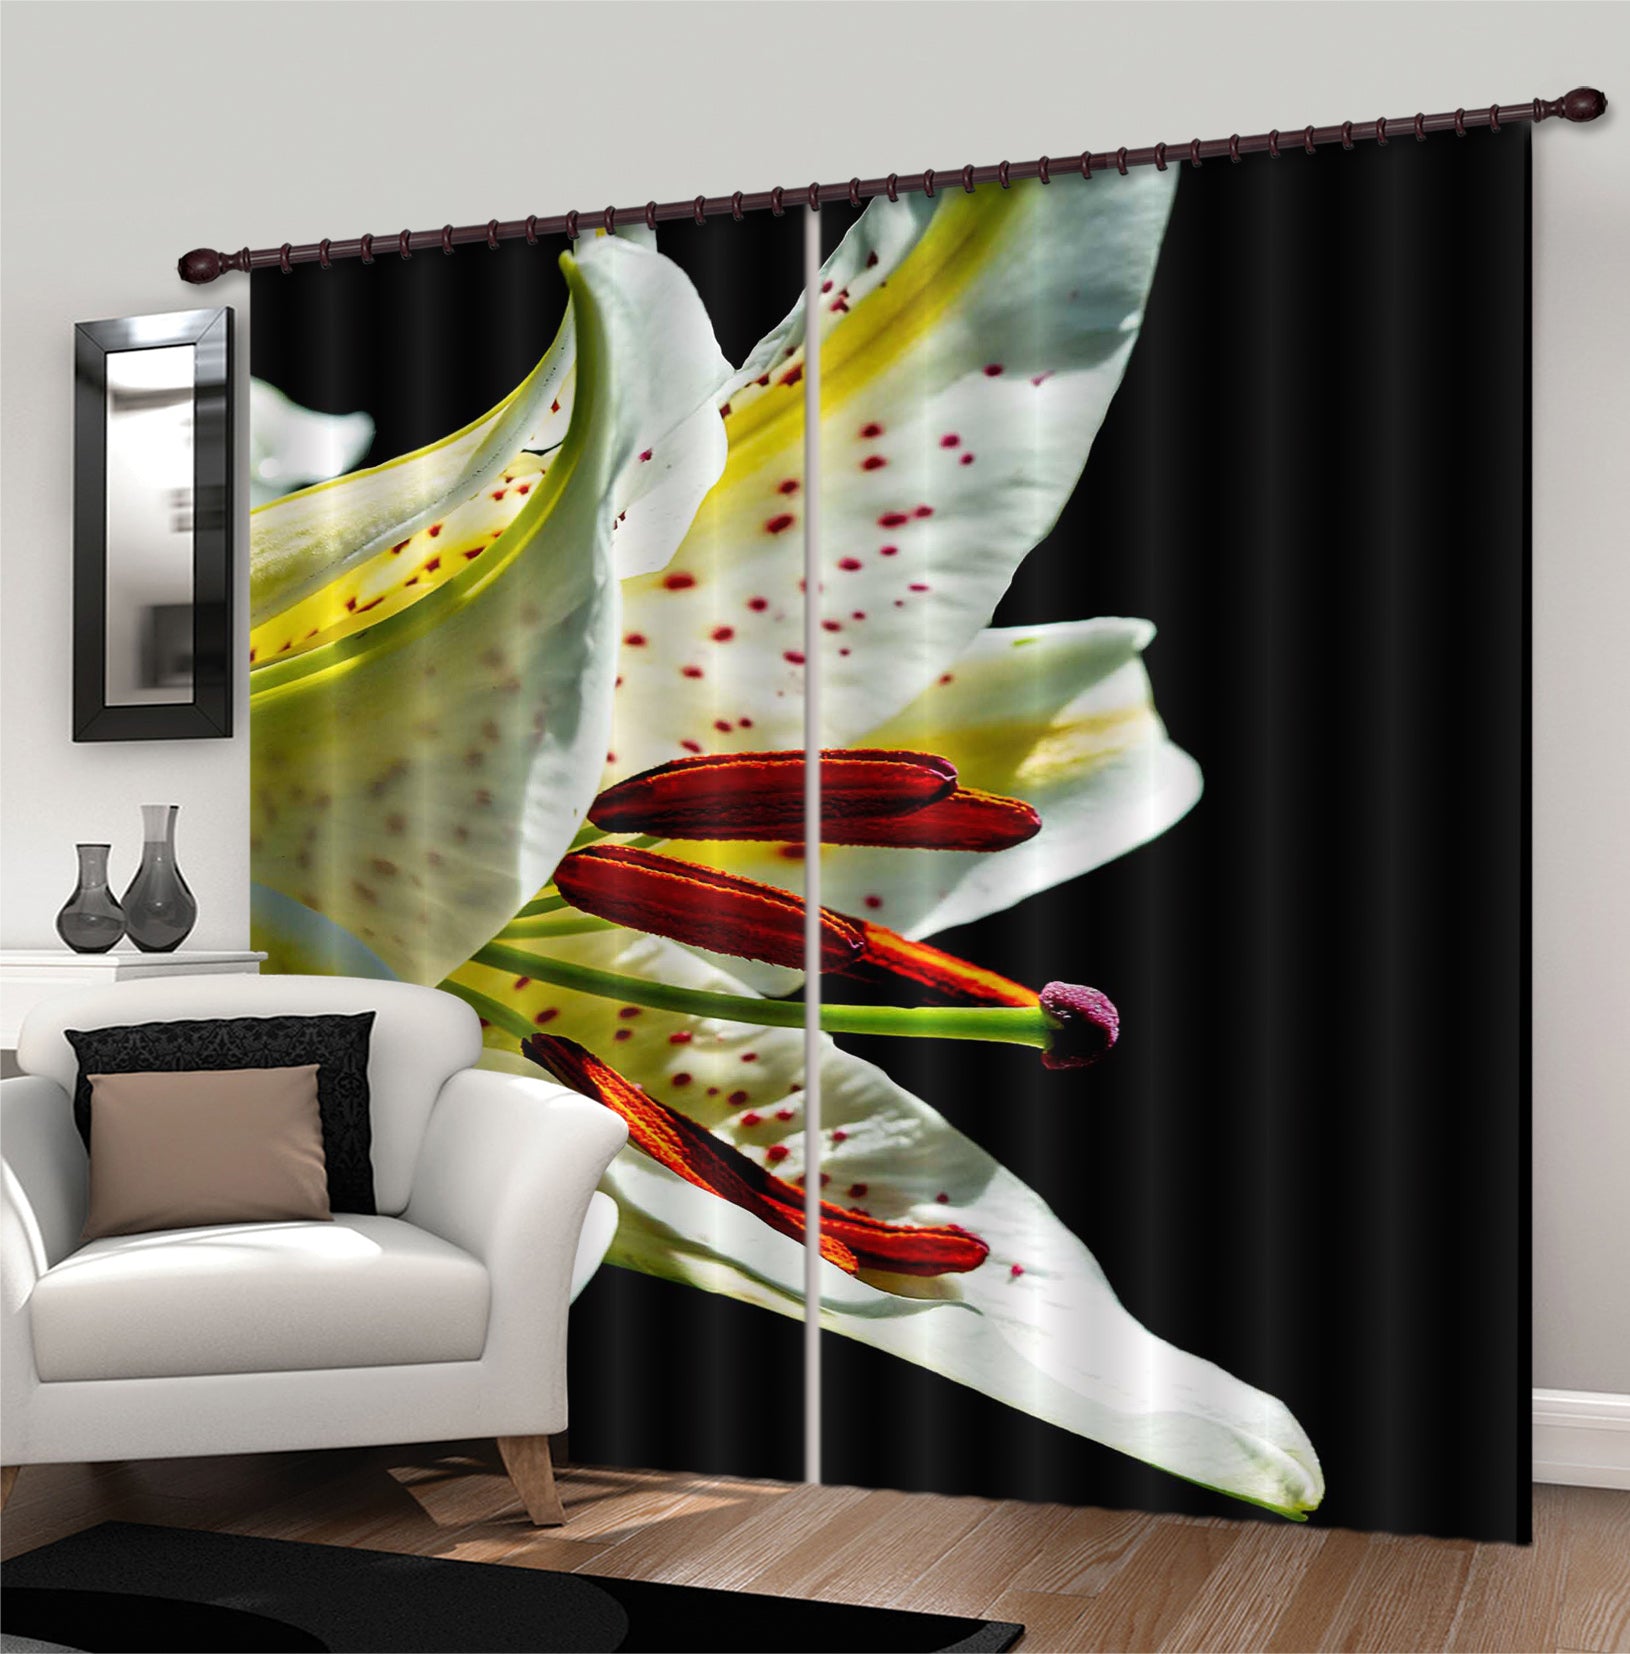 3D Lily 076 Kathy Barefield Curtain Curtains Drapes